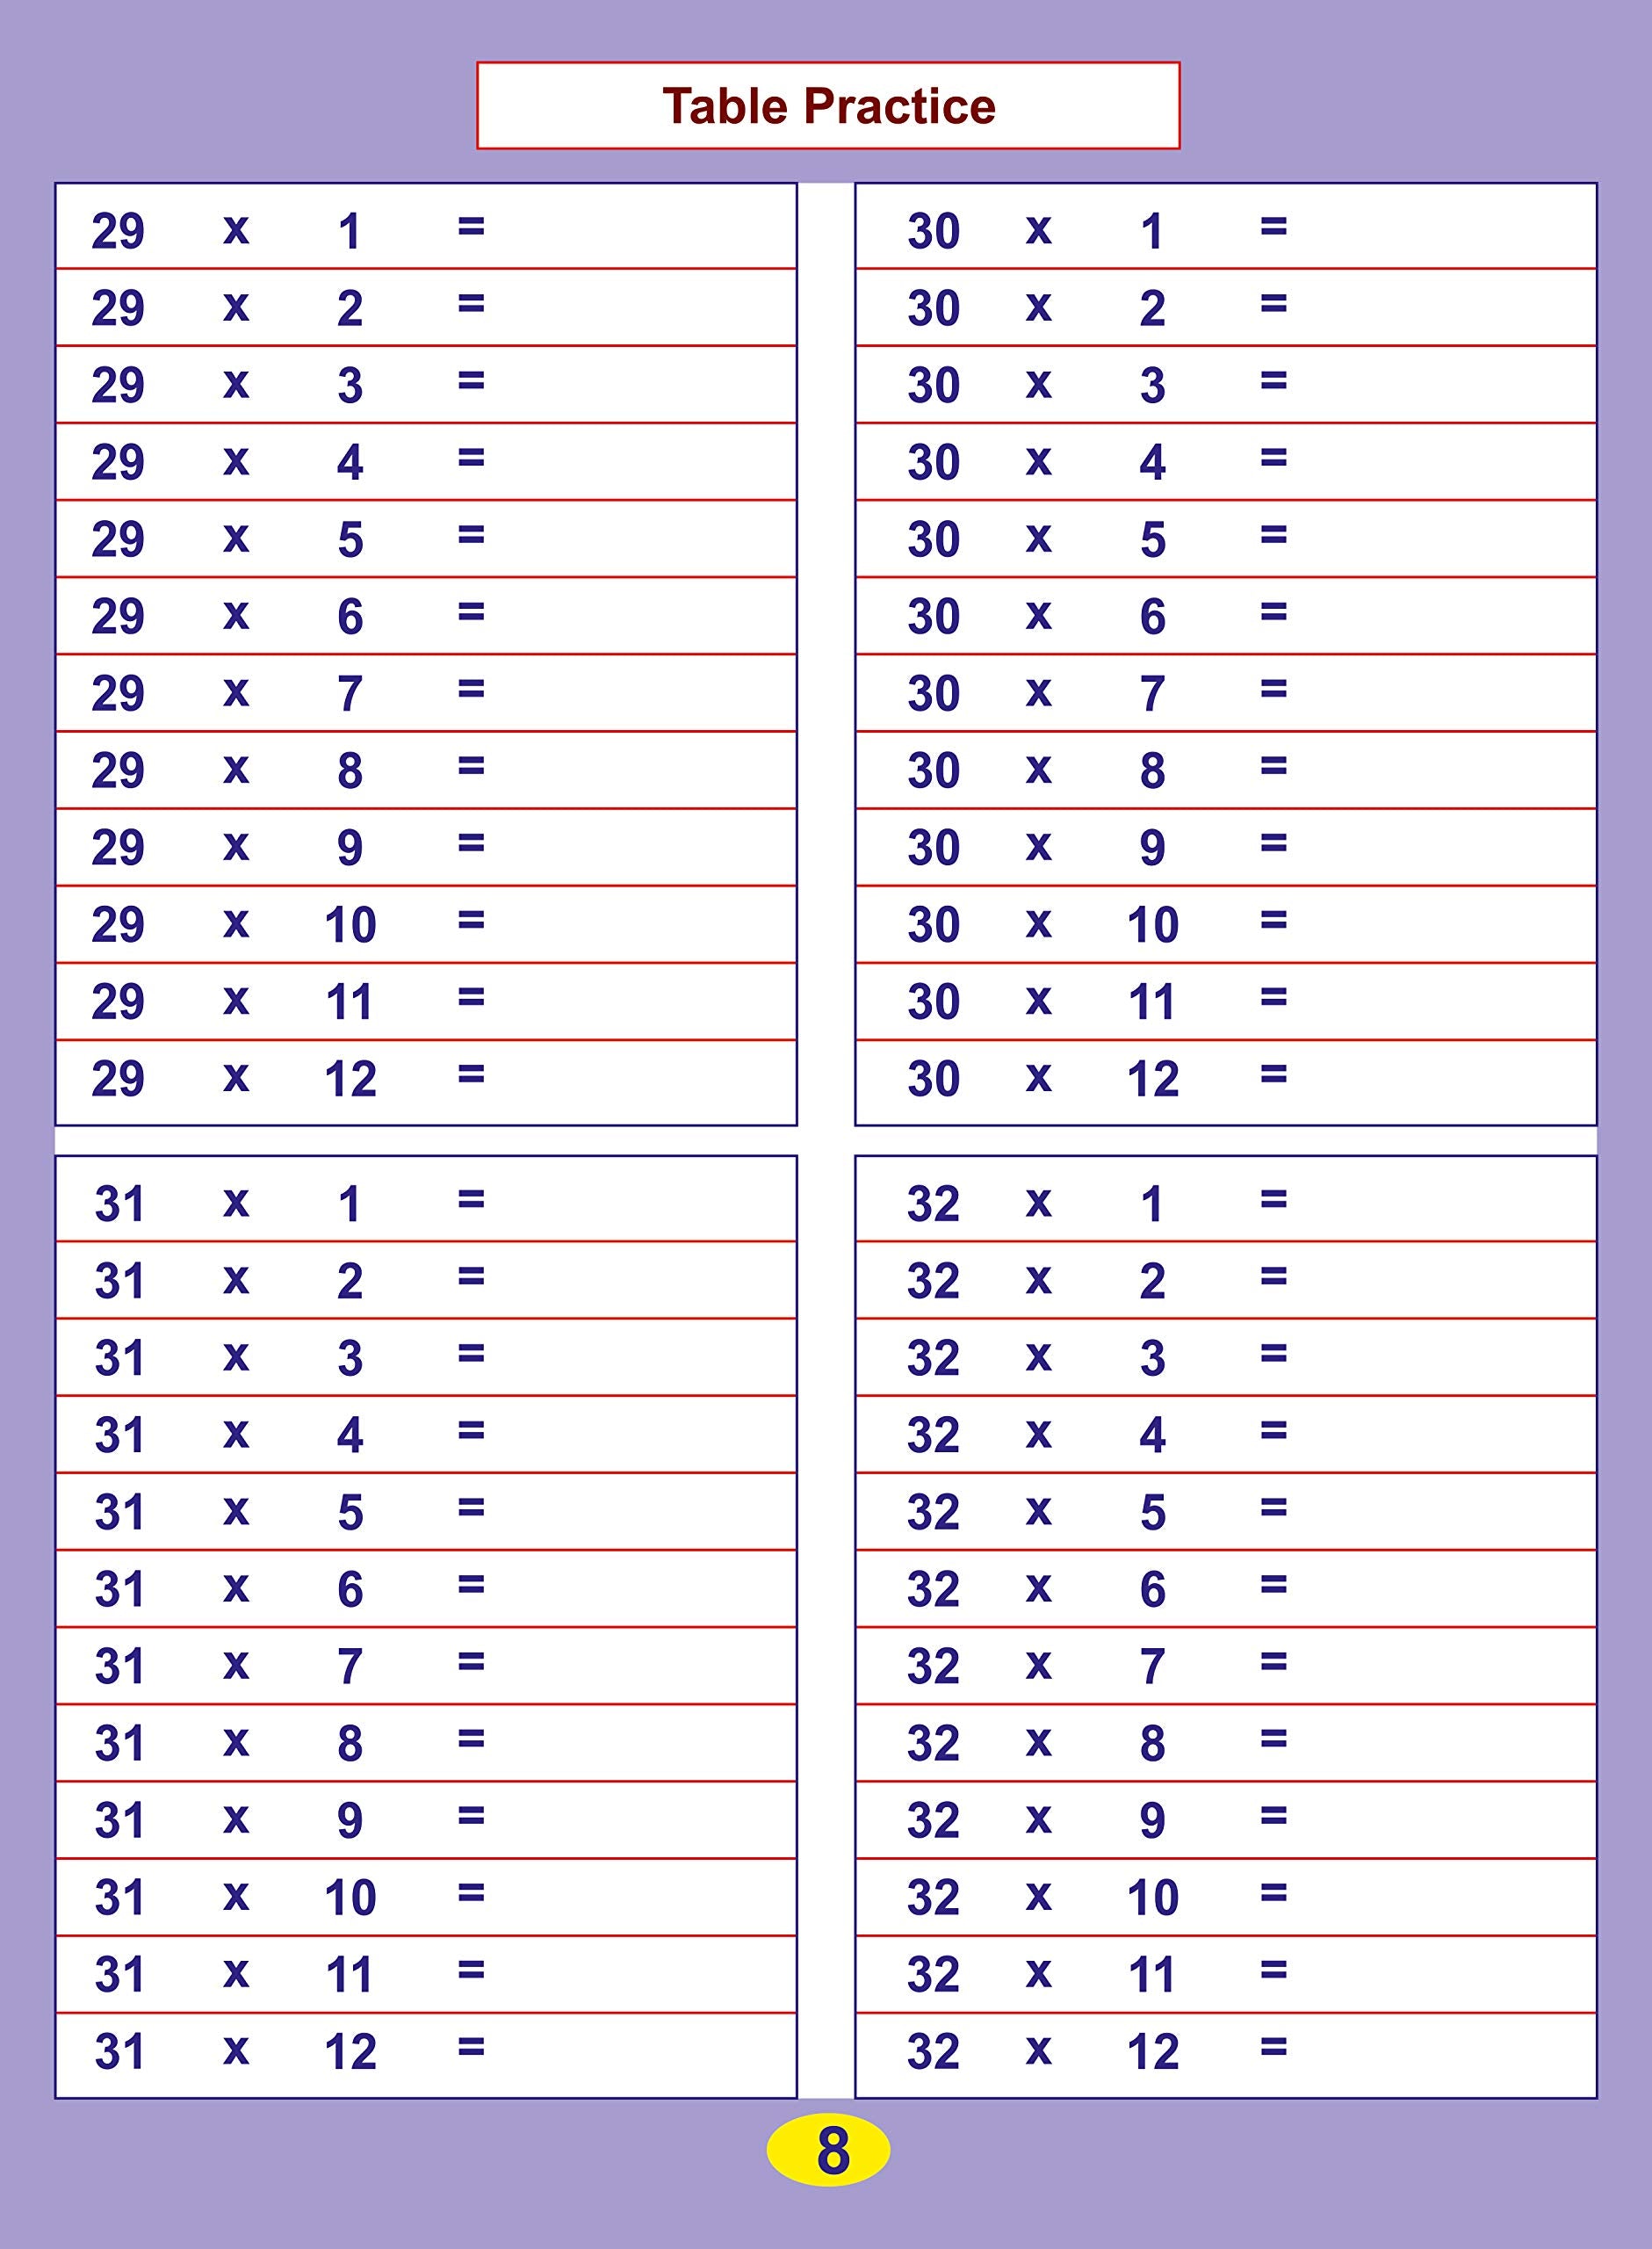 Multiplication Tables [all facts to 12] Jumbo Pad, 30 Sheets, Grade 2-5